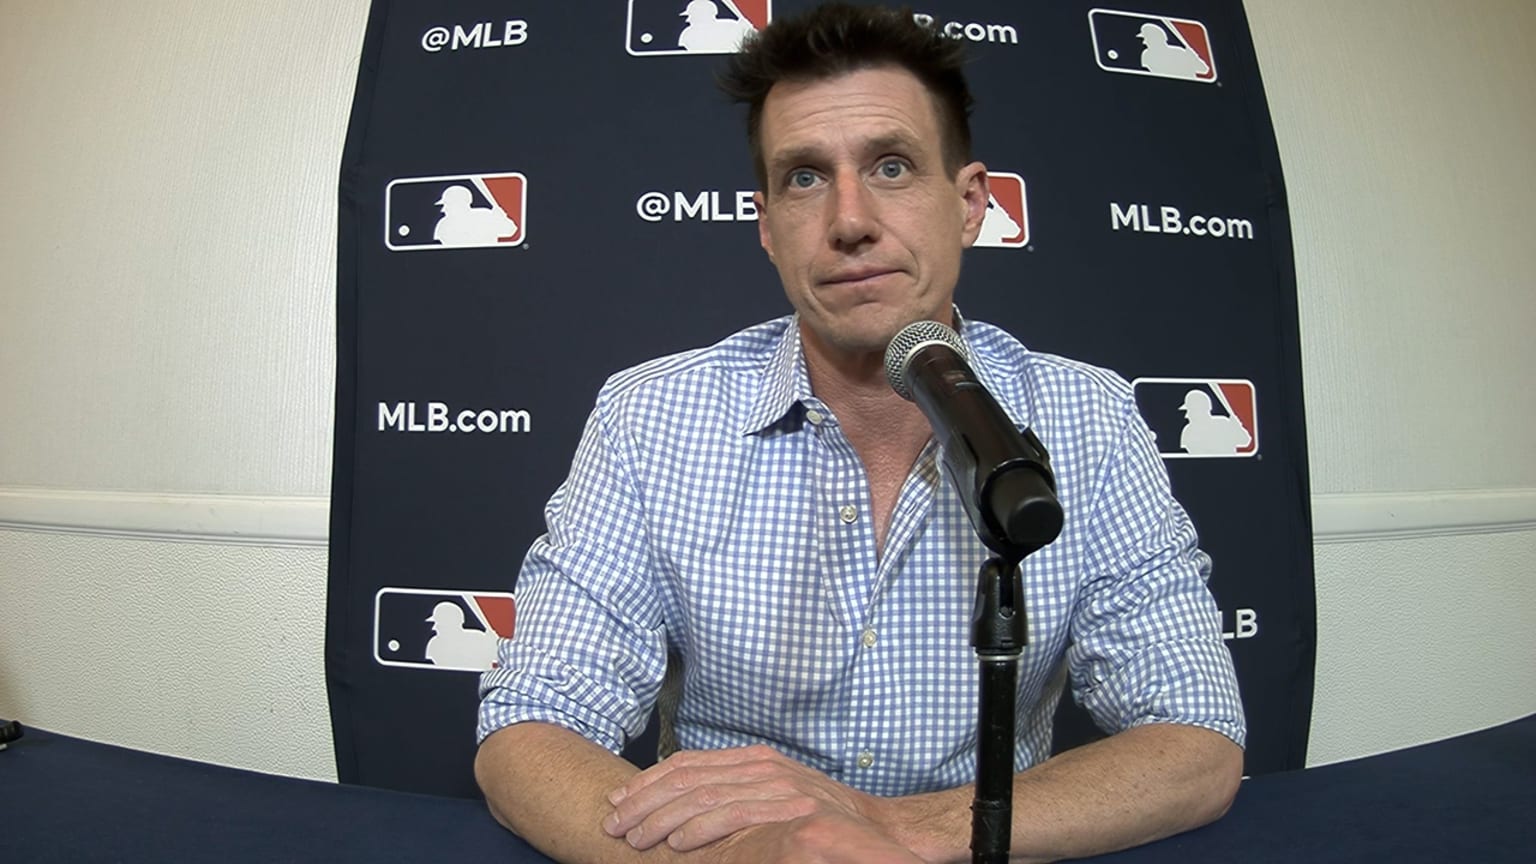 Irish Alum Craig Counsell Retires After 16 Years In MLB – Notre